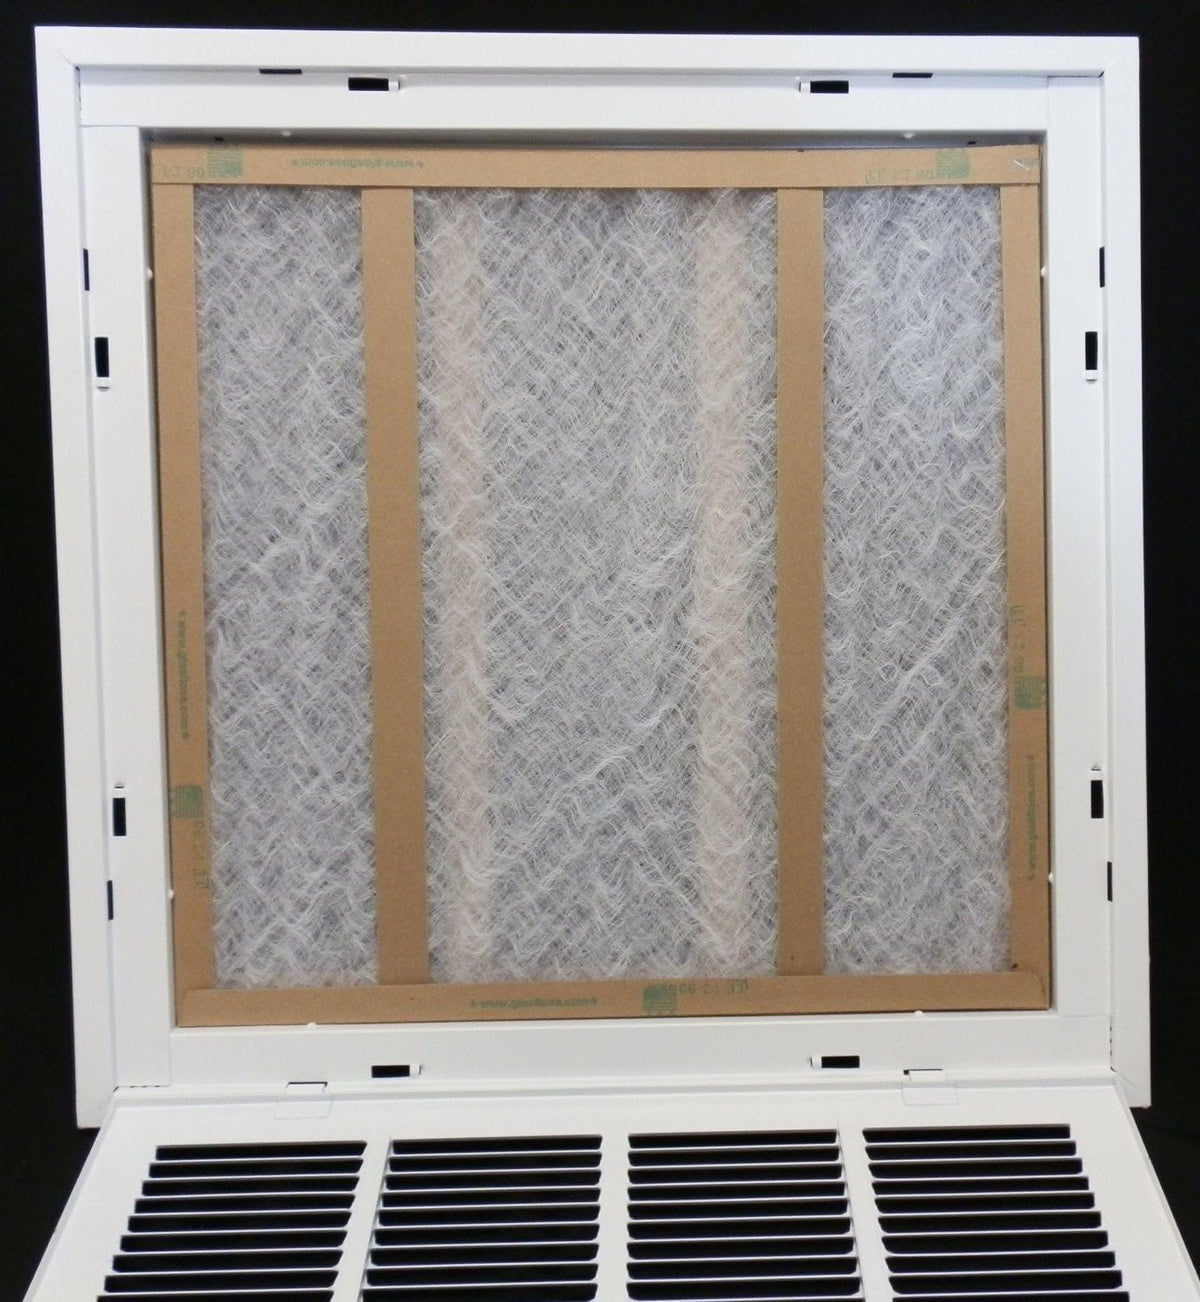 16&quot; X 20&quot; Steel Return Air Filter Grille for 1&quot; Filter - Fixed Hinged - [Outer Dimensions: 18 5/8&quot; X 22 5/8&quot;]